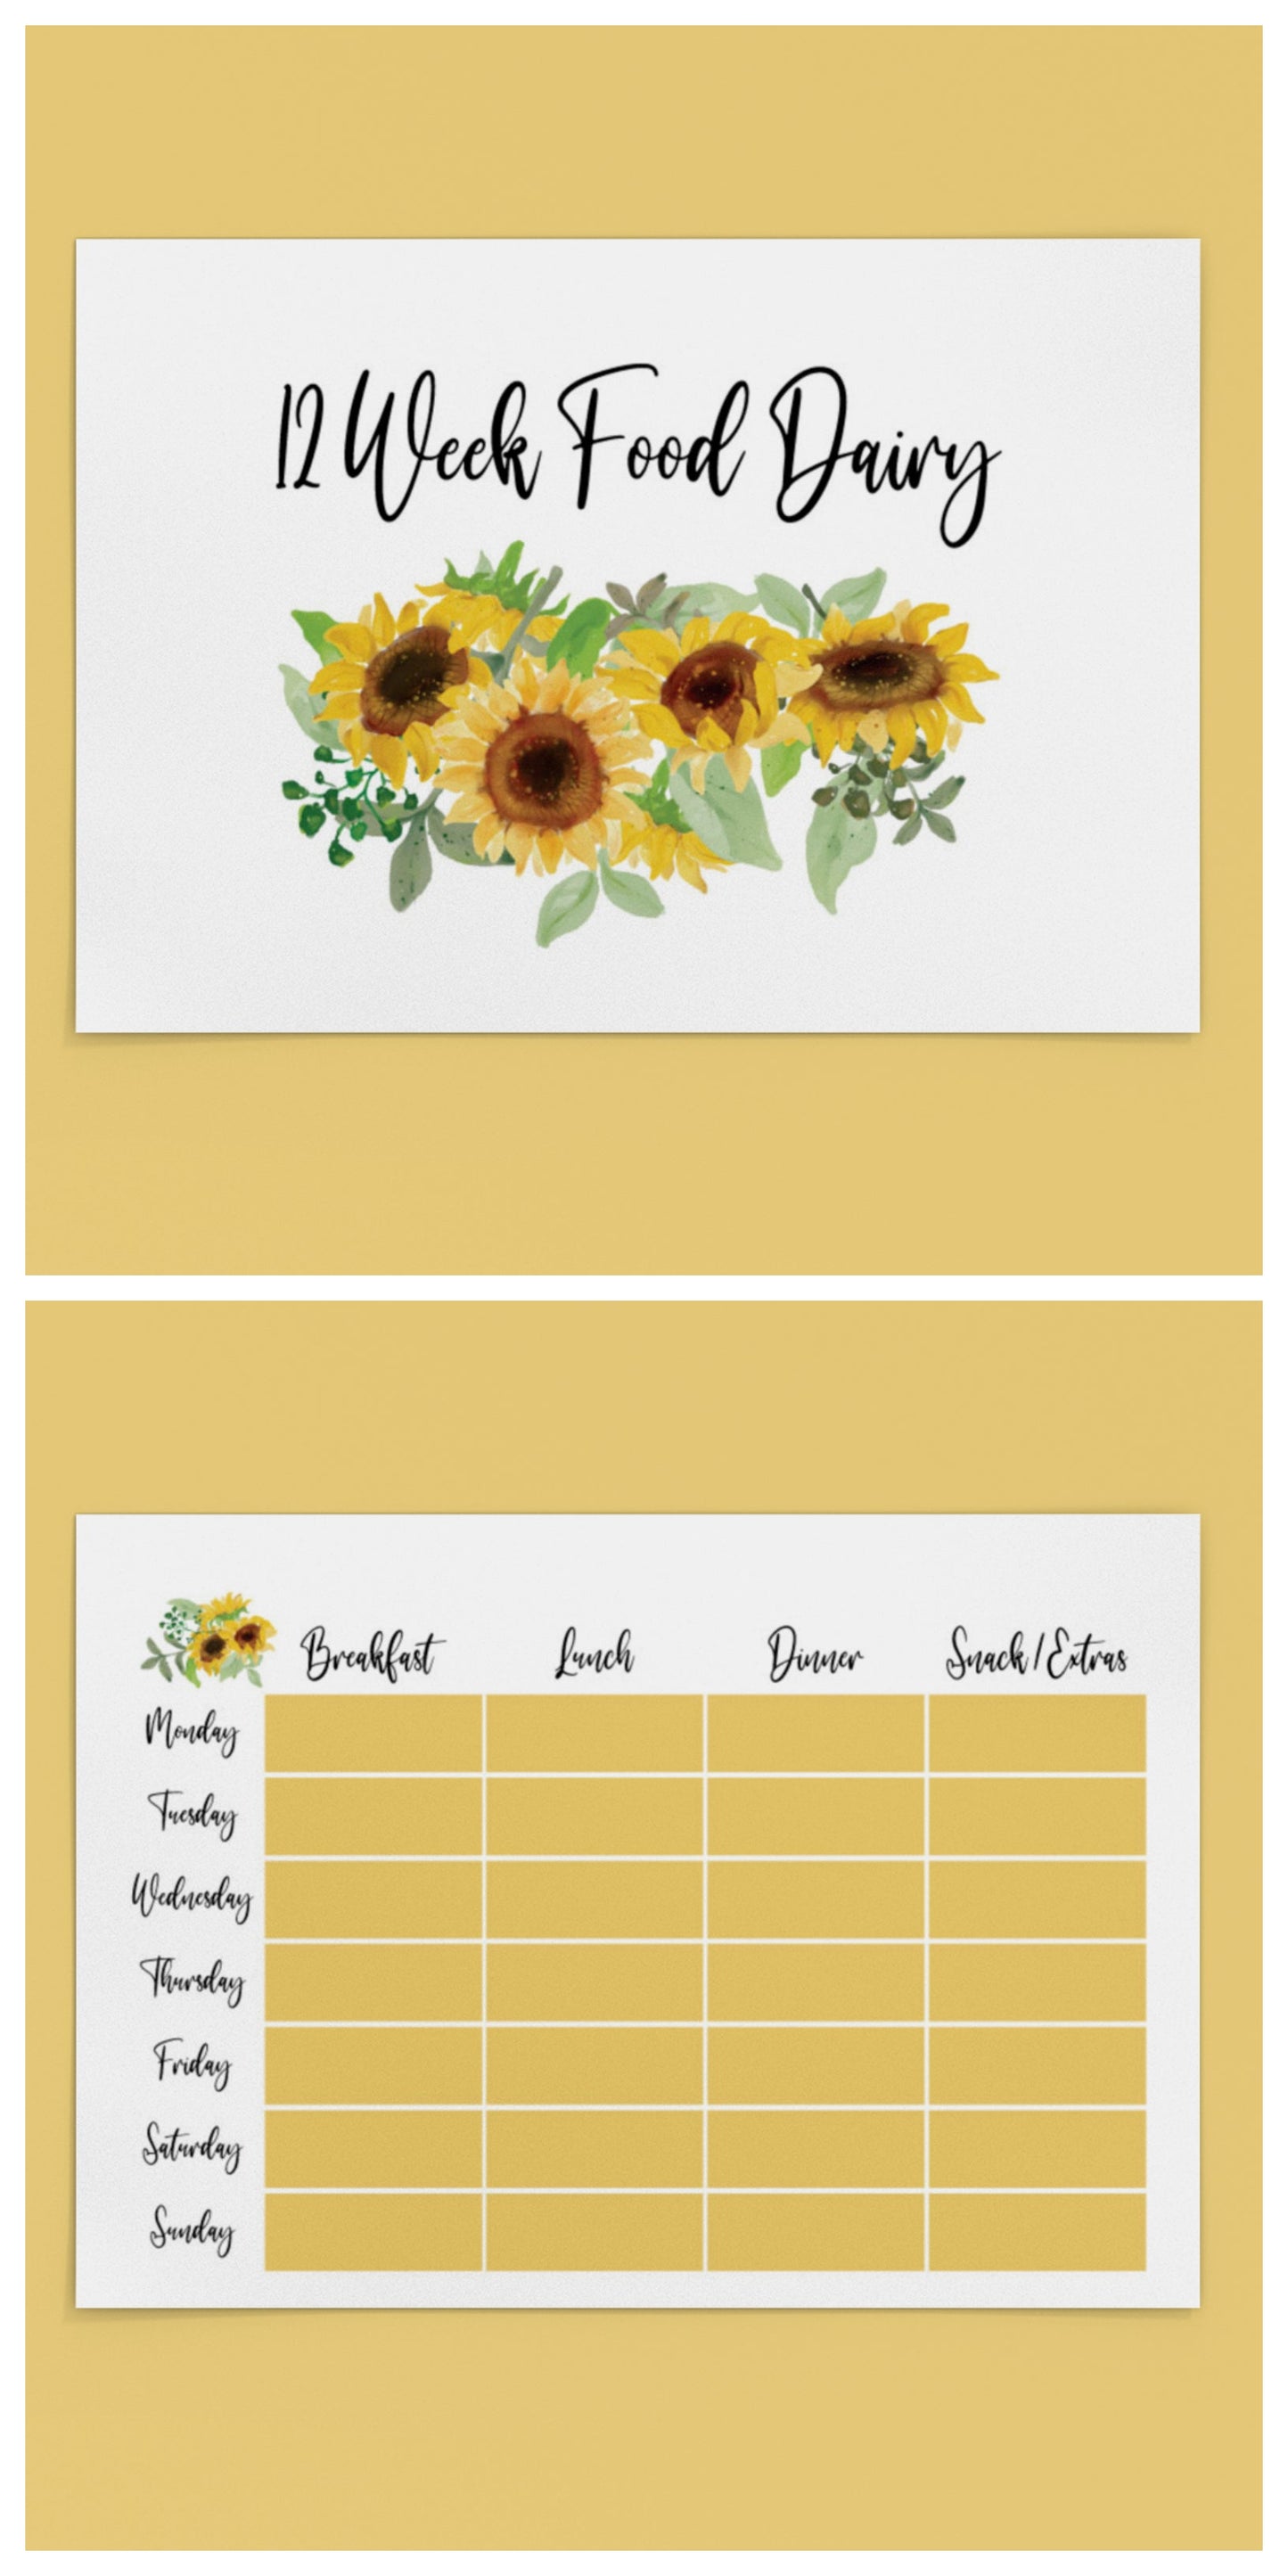 Binded Cute Sunflower Pretty A4 Weight Loss & Diet 12 Week Food Journal Diary